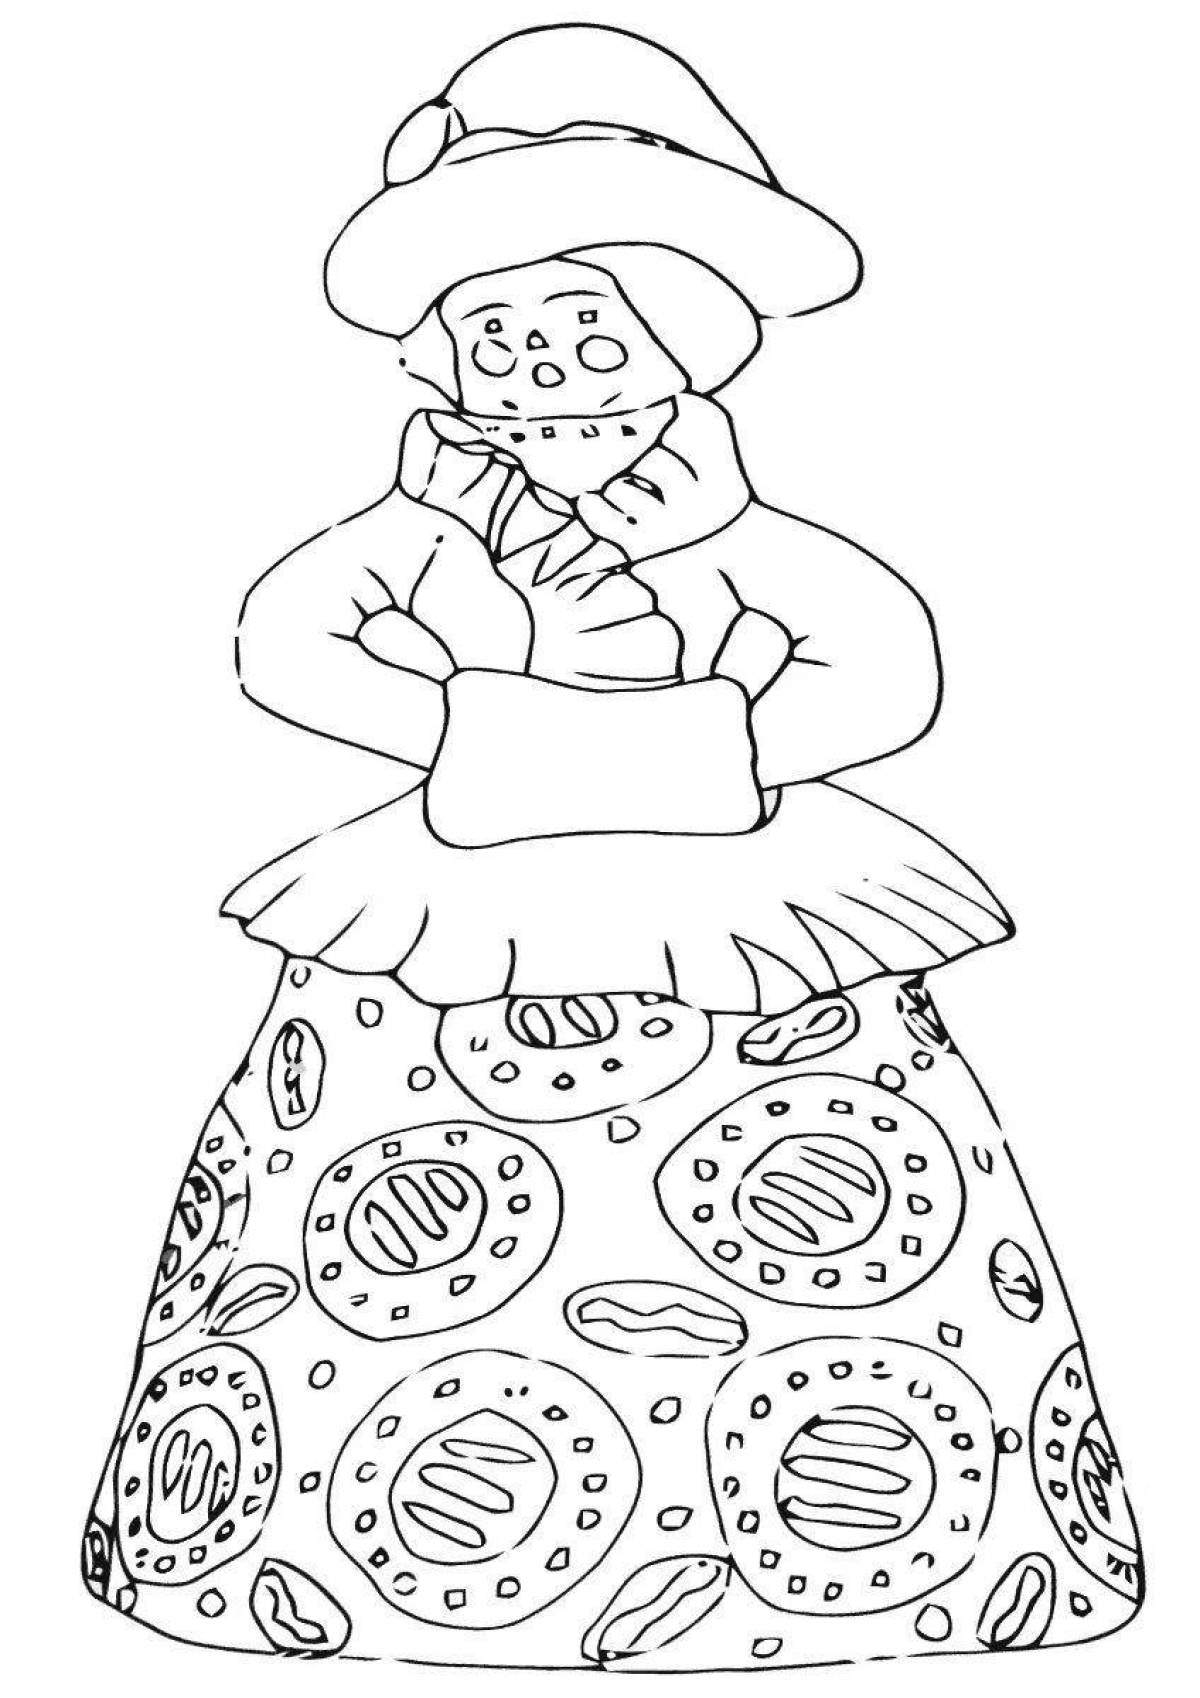 Coloring page radiant Dymkovo hostess